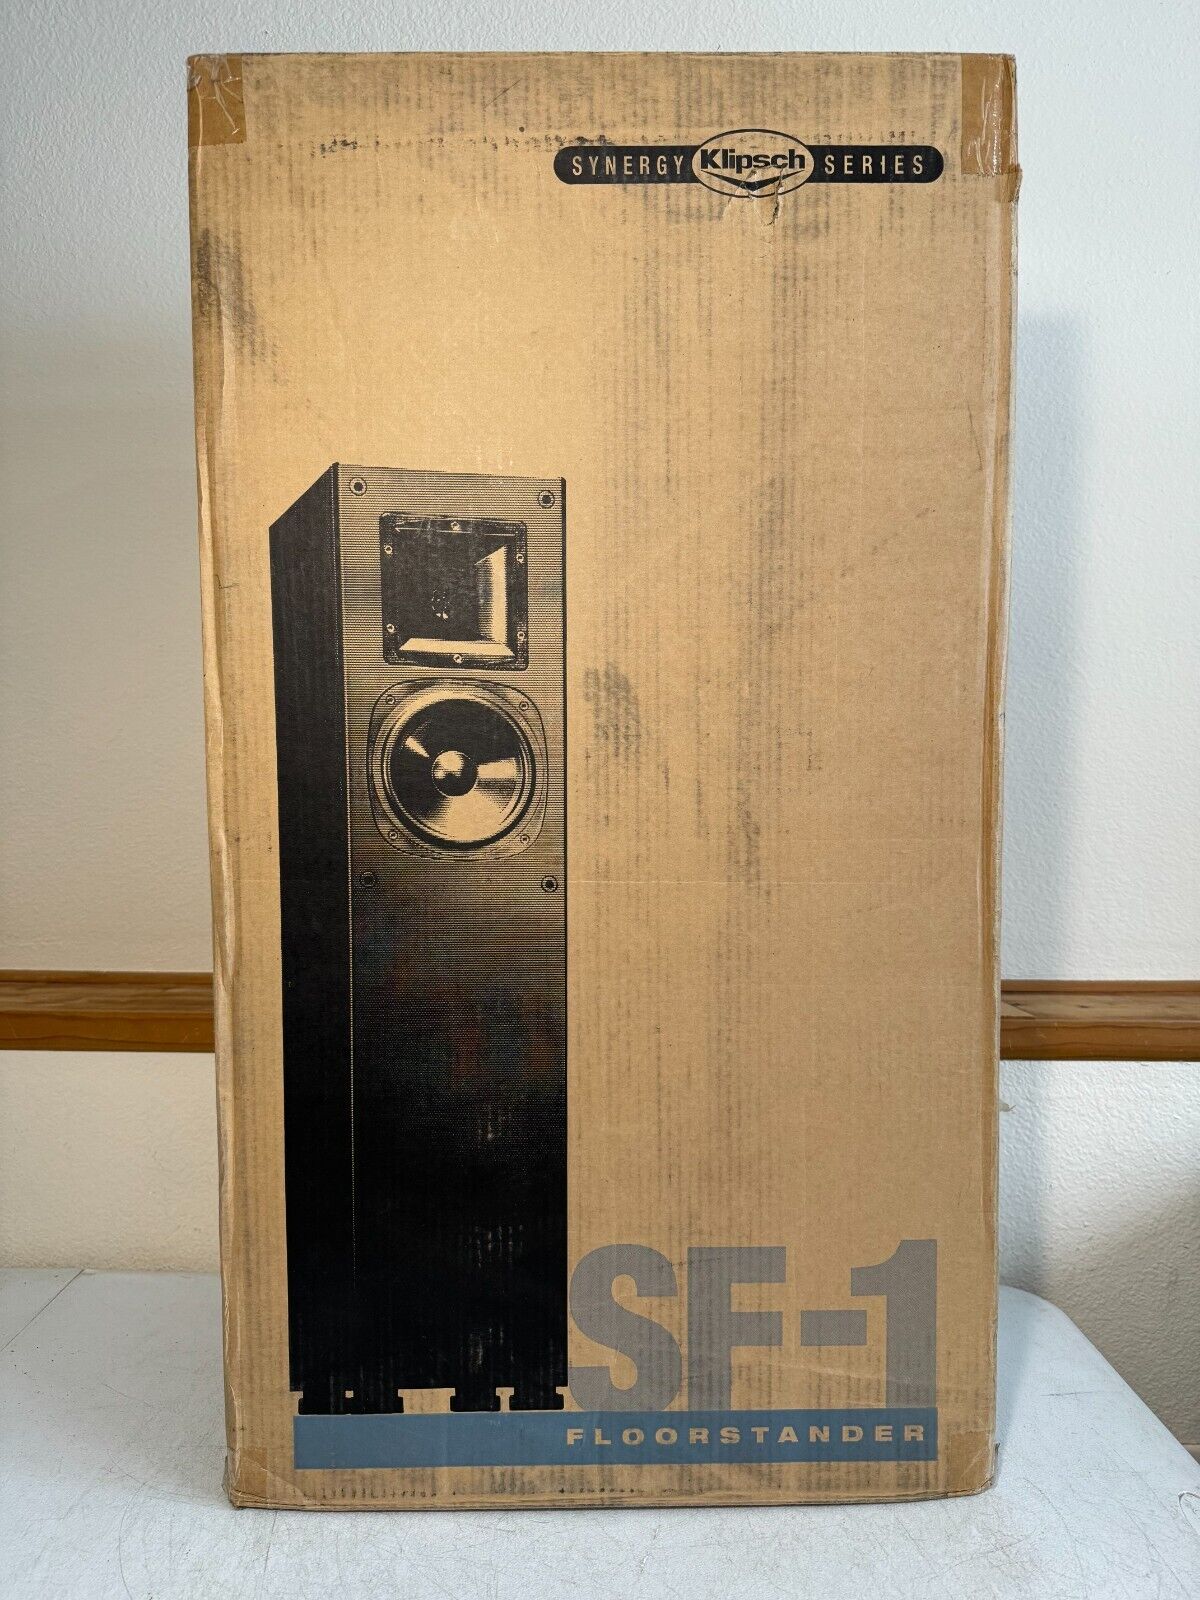 Klipsch Synergy SF-1 Tower Speakers Home Theater Audiophile Vintage - NEW SEALED